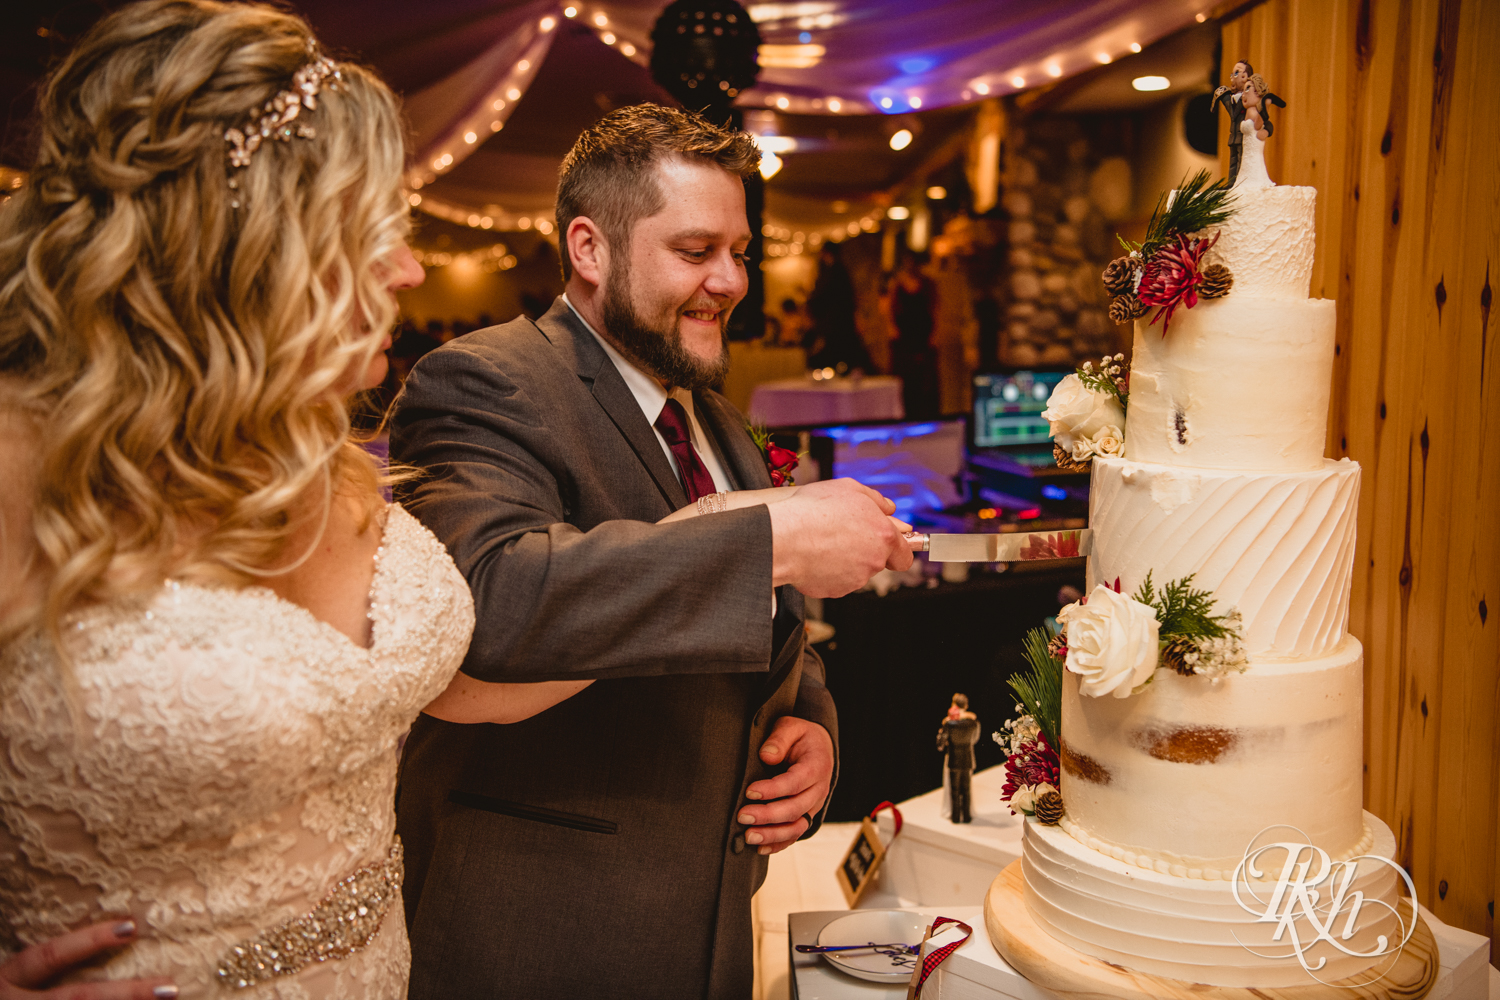 Bride and groom cut cake during winter wedding reception at Whitefish Lodge in Crosslake, Minnesota.